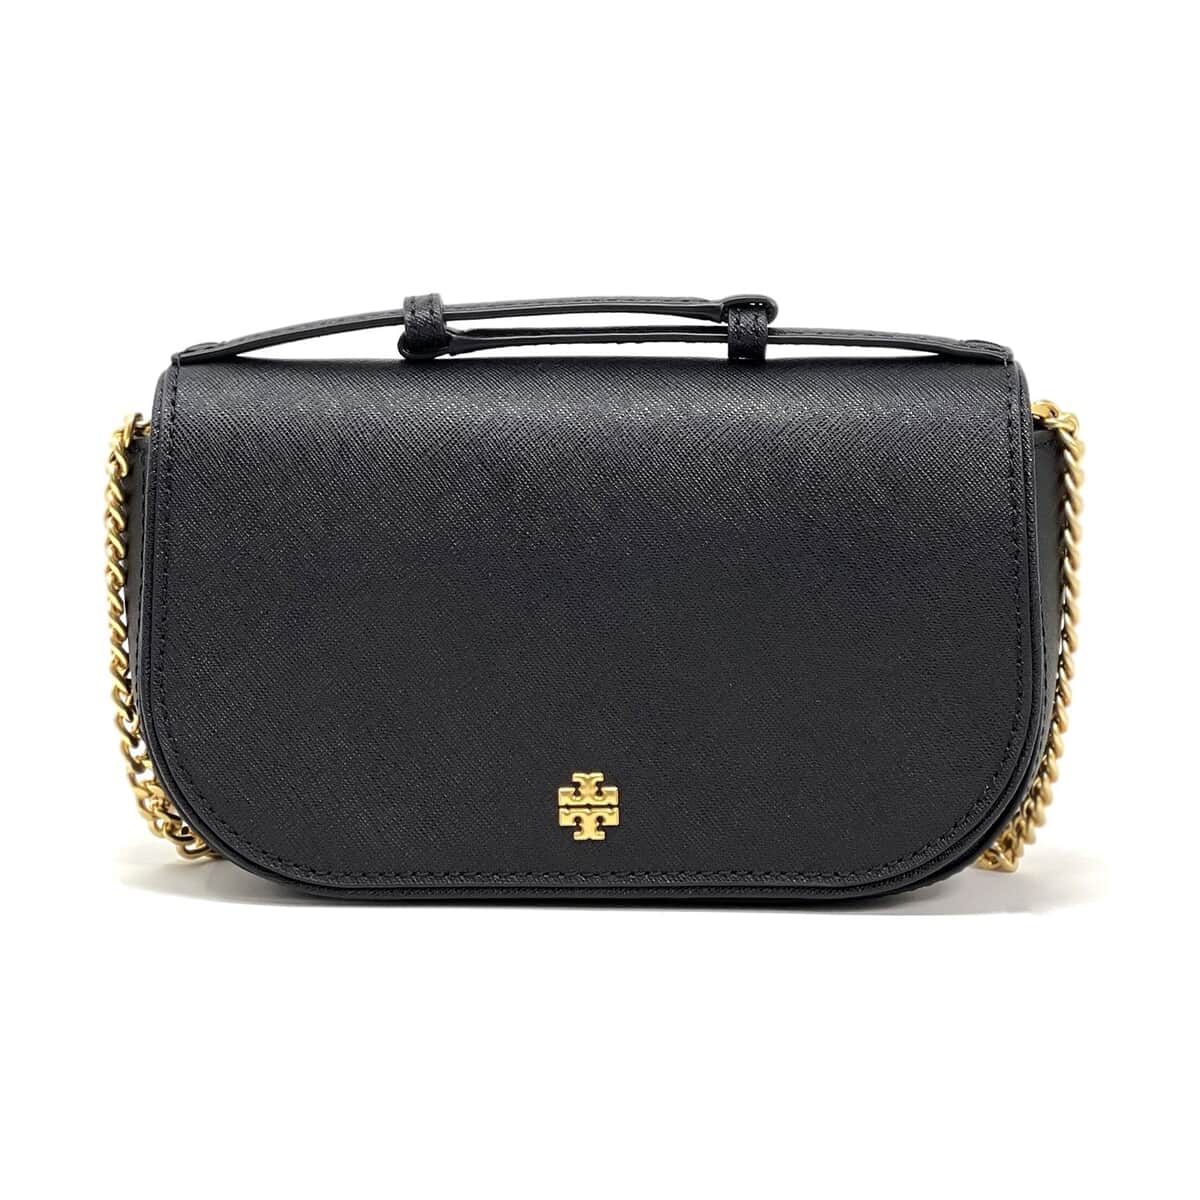 Tory Burch Black Saffiano Leather Emerson Printed Top Handle Crossbody Bag image number 0